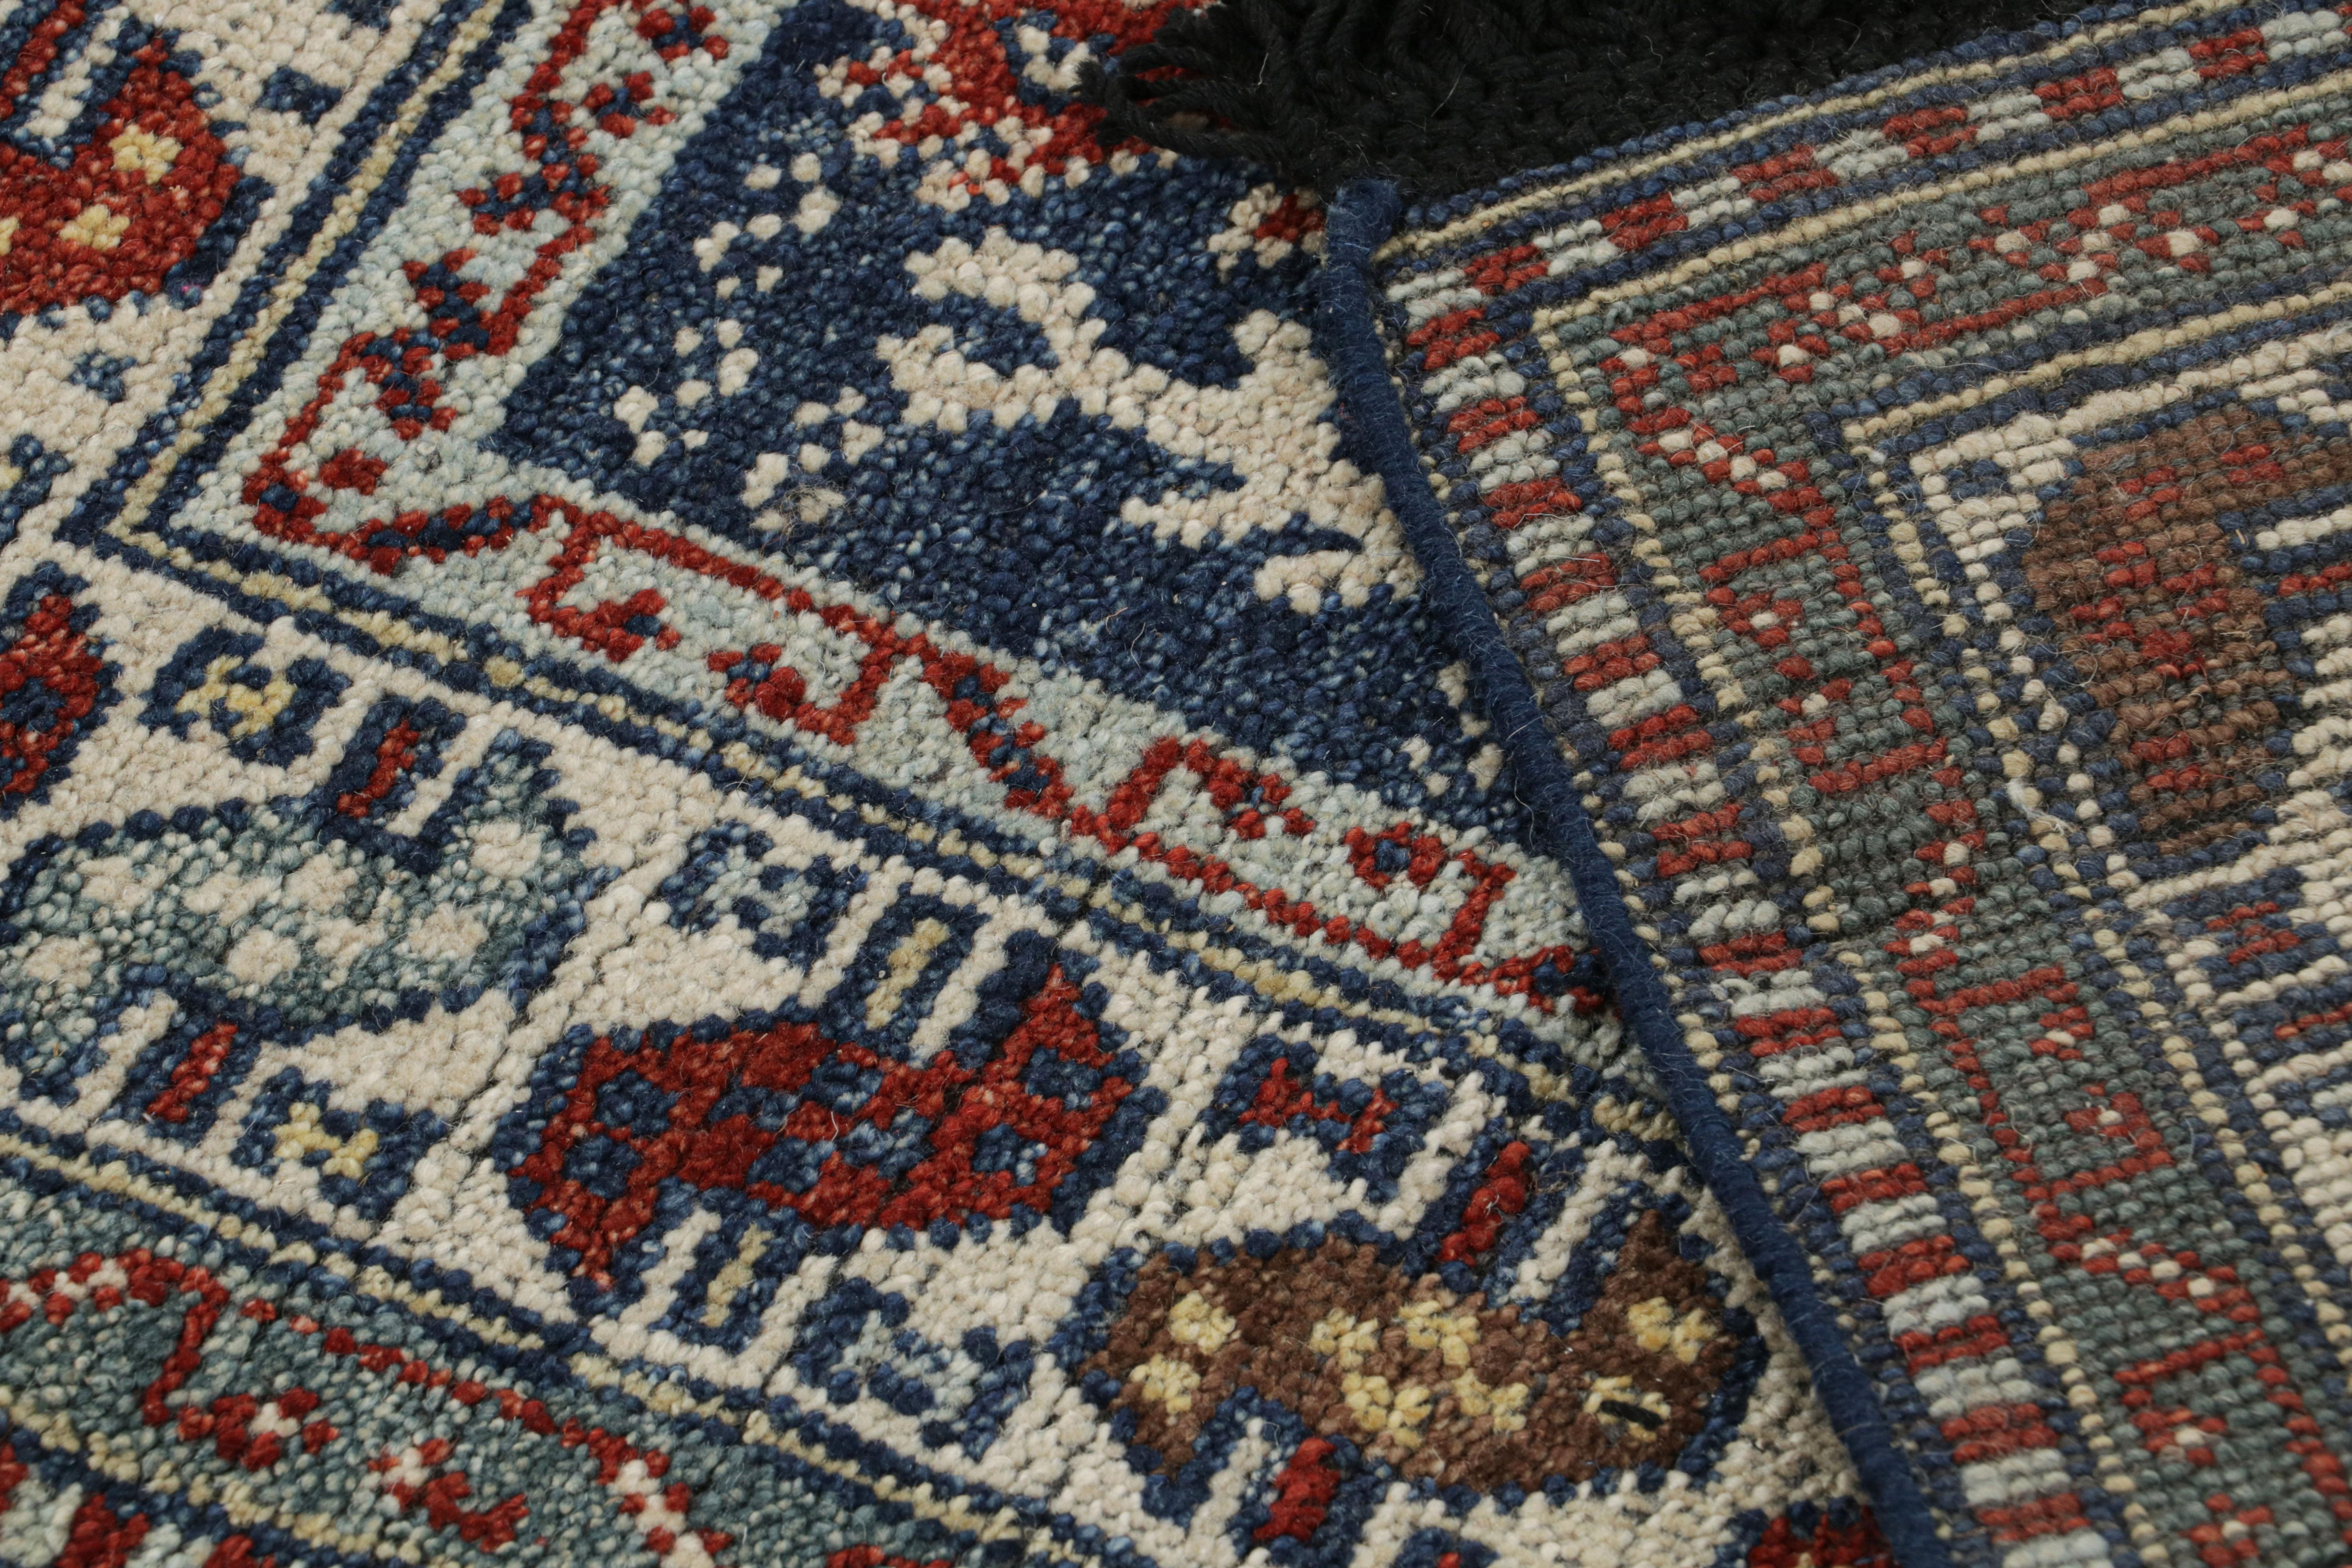 Wool Rug & Kilim’s Blue Tribal Style Square Rug with Primitivist Geometric Patterns For Sale